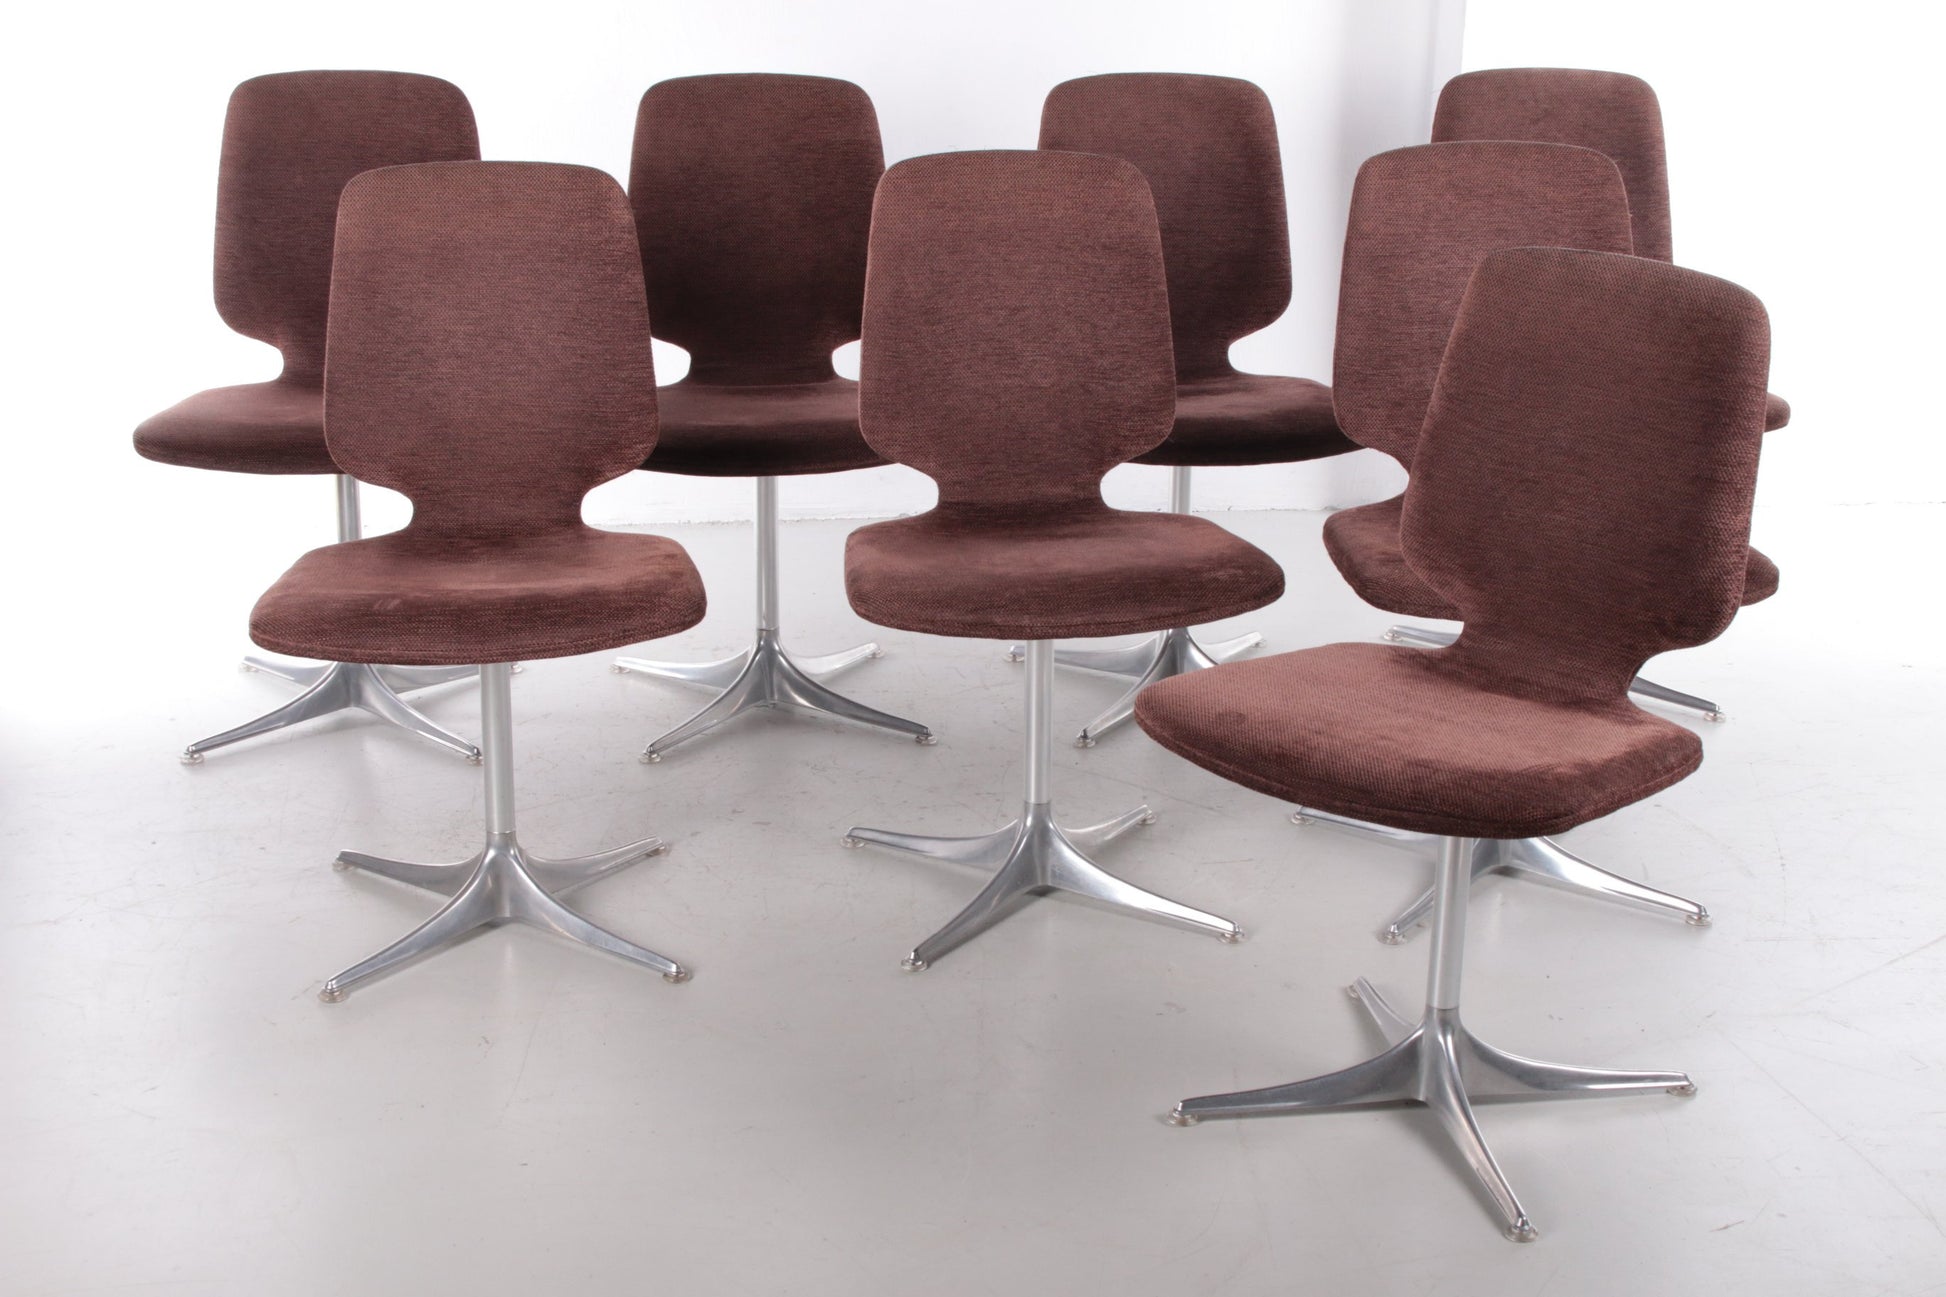 Nadruk Schijnen Valkuilen Set of 8 Chairs with table by Horst Bruning Chair Model Sedia for cor. –  Timeless-Art